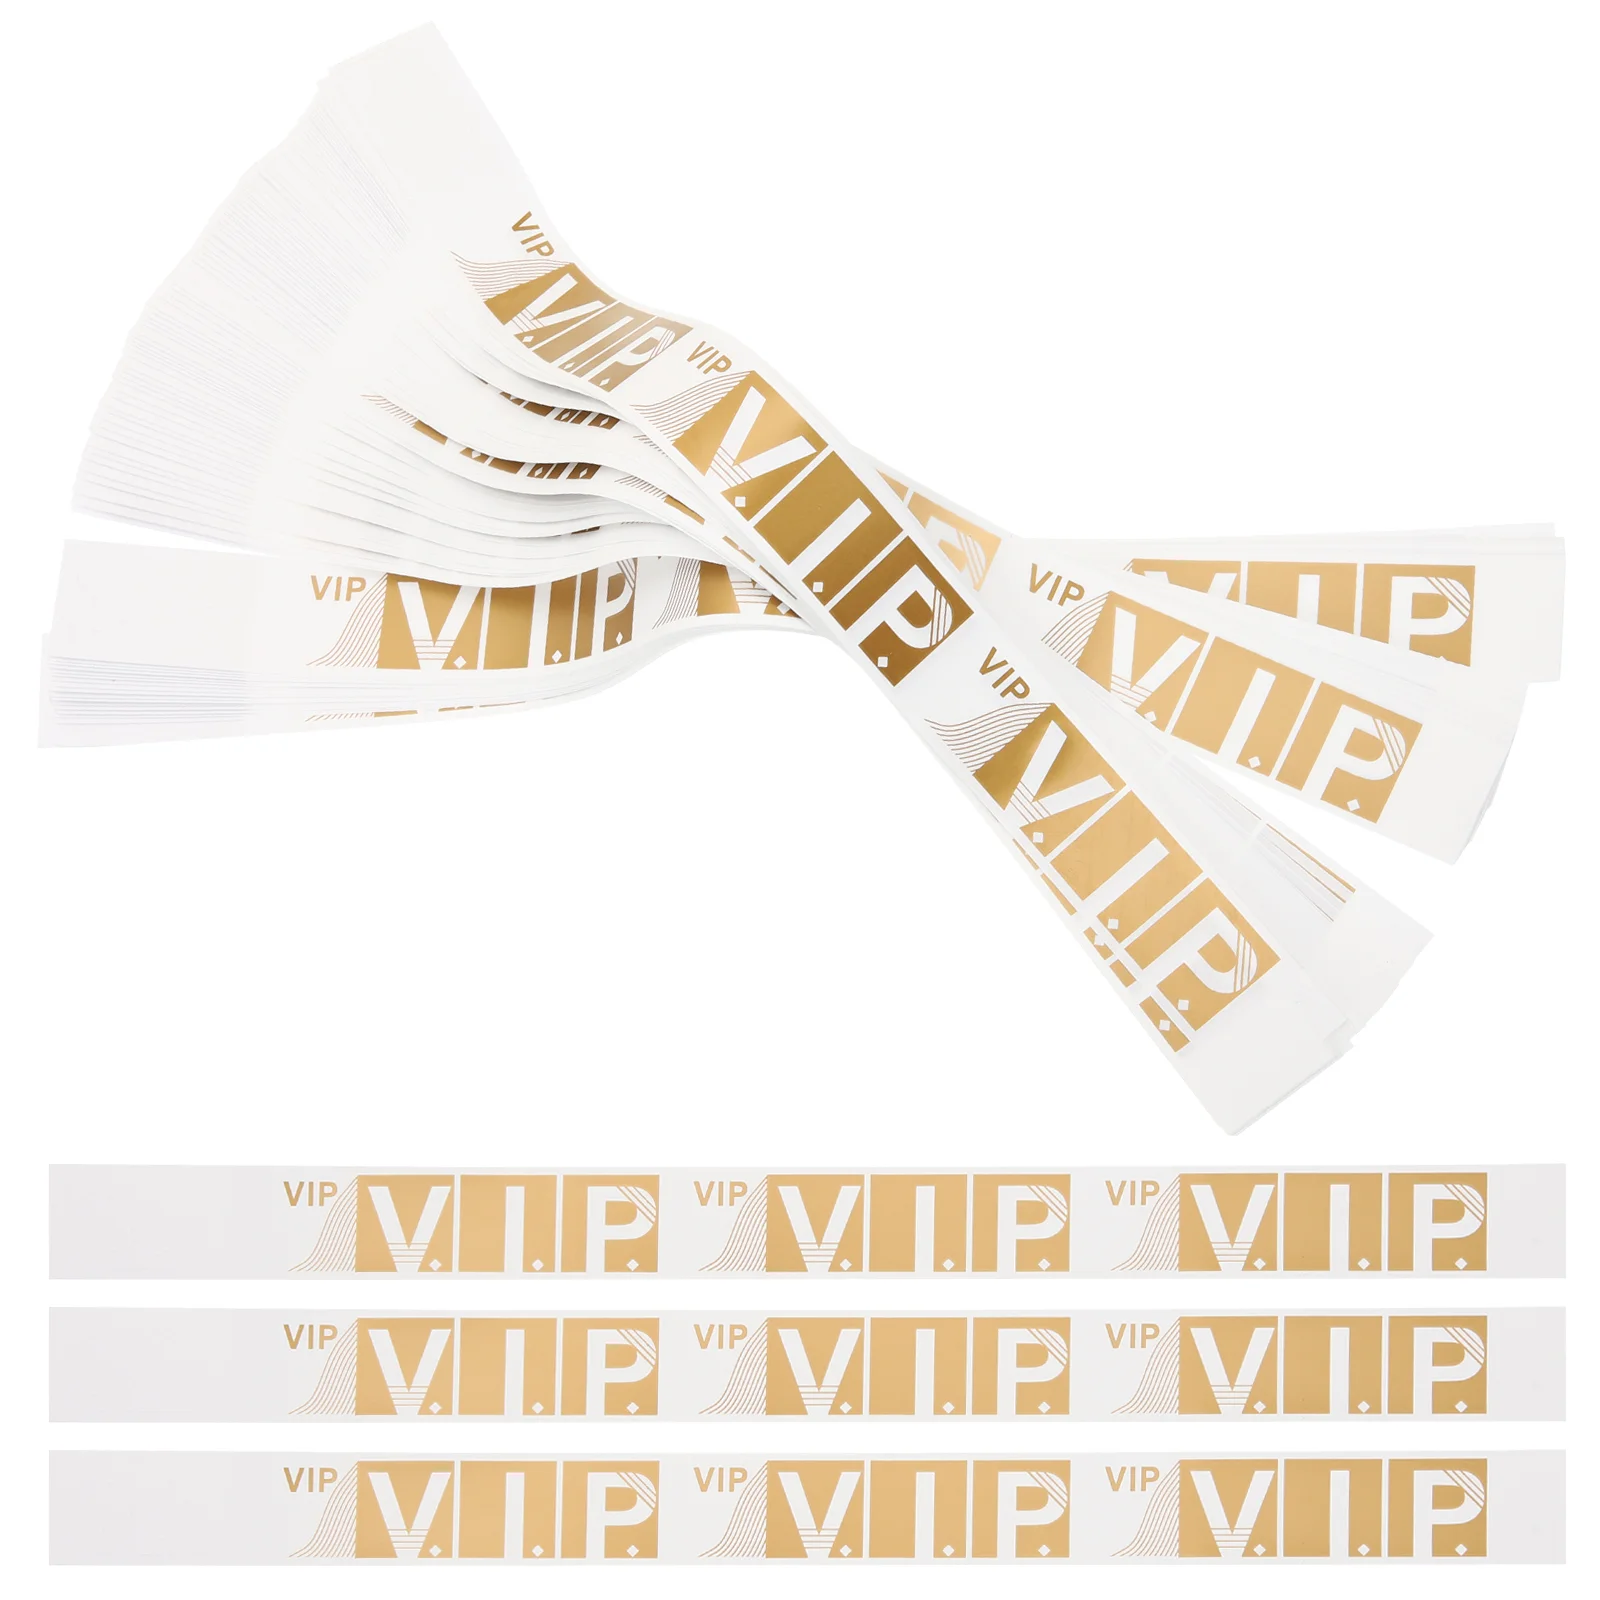 200 Pcs Party Wristband Waterproof Bracelet VIP Bands Event Arm Synthetic Paper Wristbands Events Child